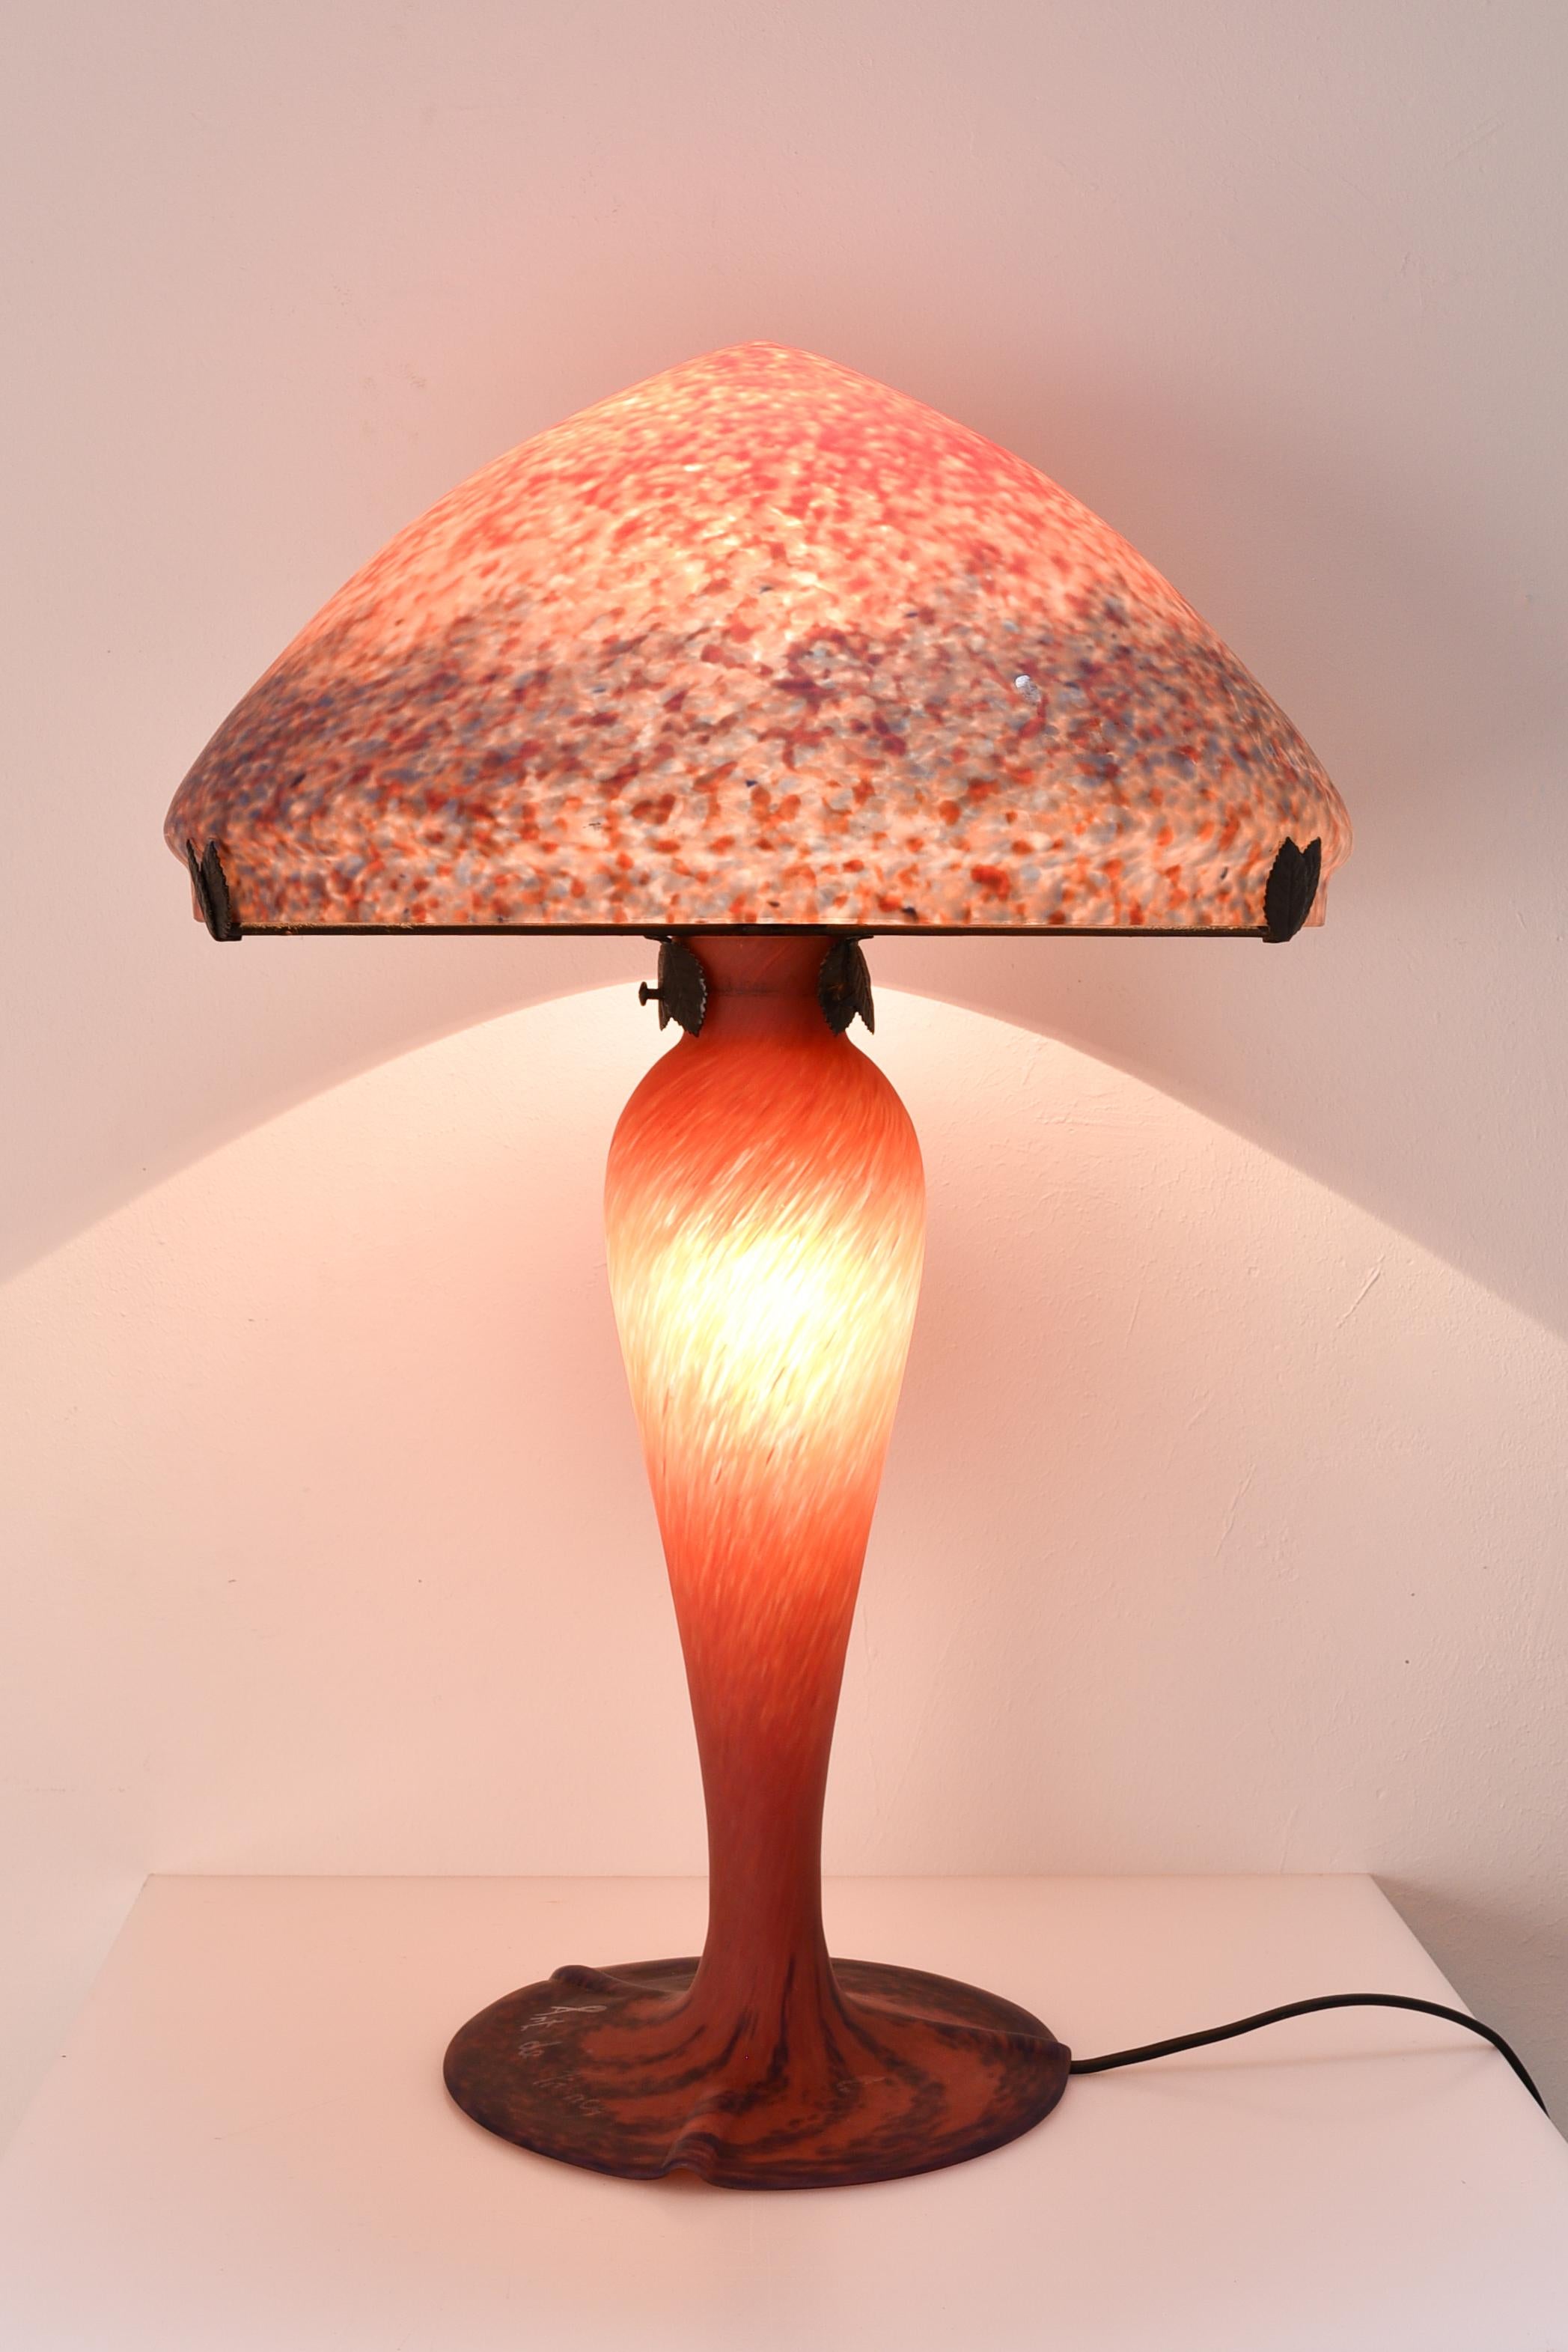 French 20th century art Nouveau table lamp by Art de France in orange and violet glass